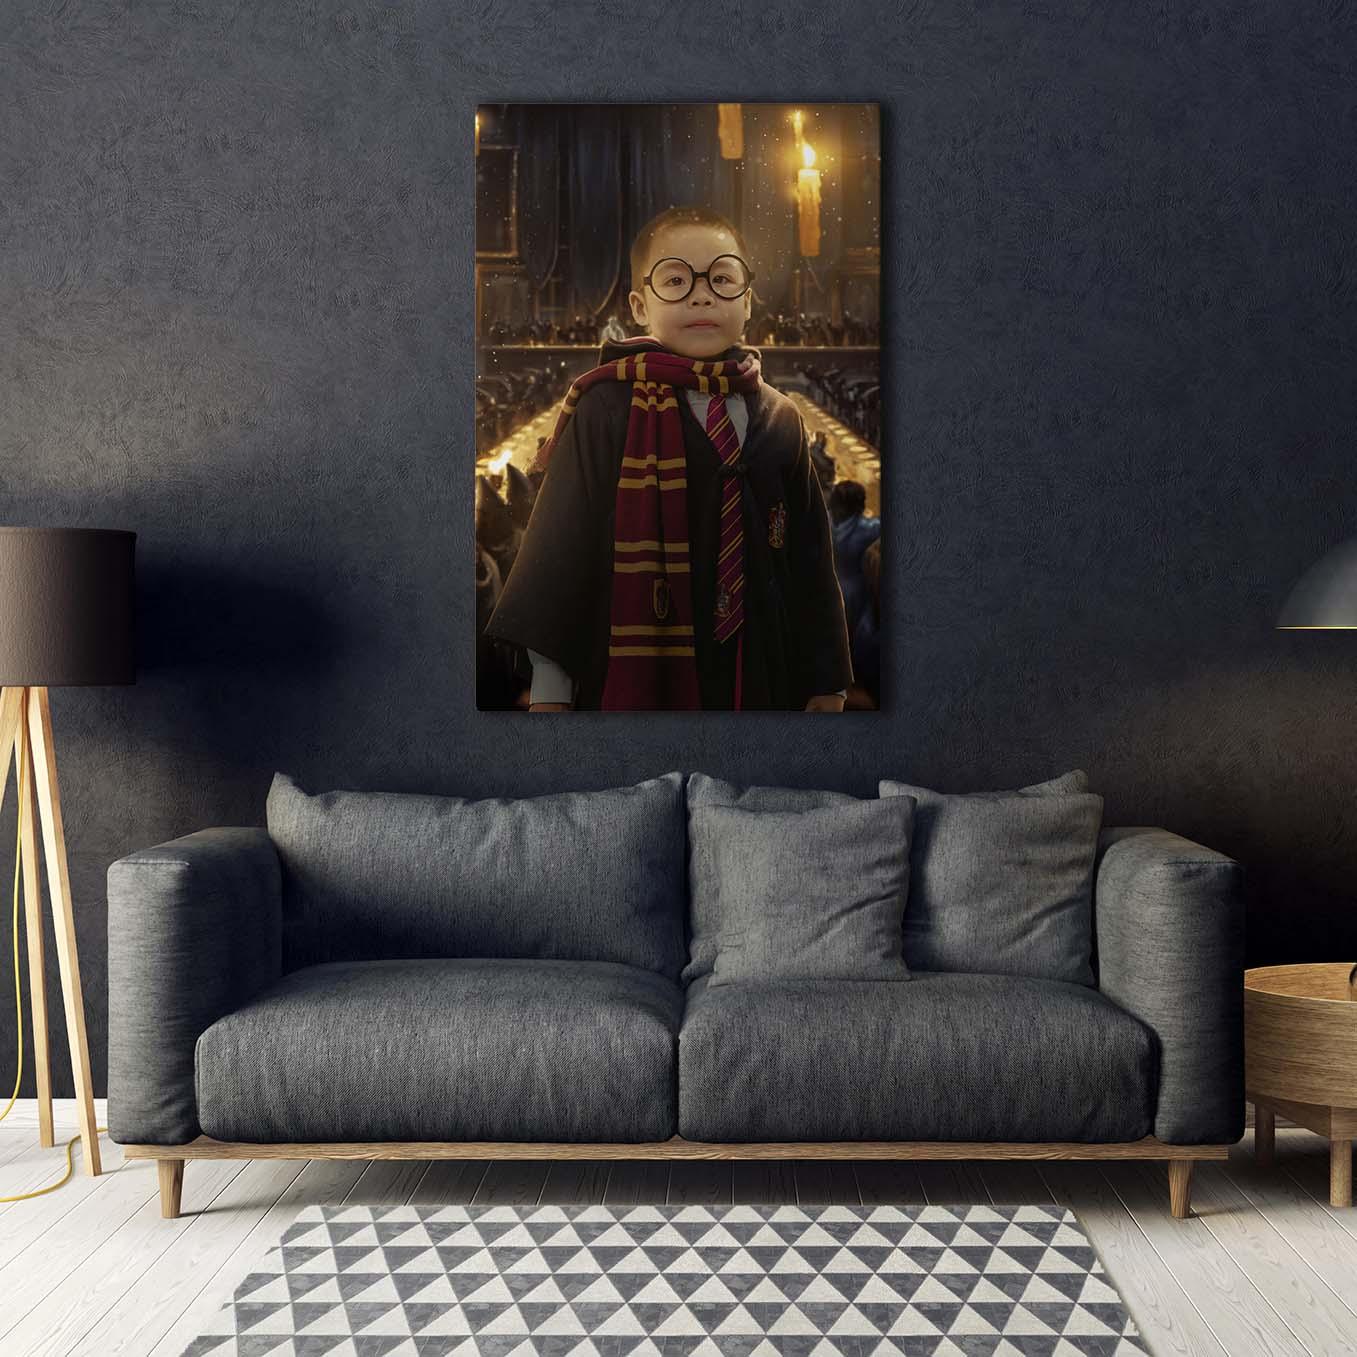 Example of The Wizard portrait in a living room